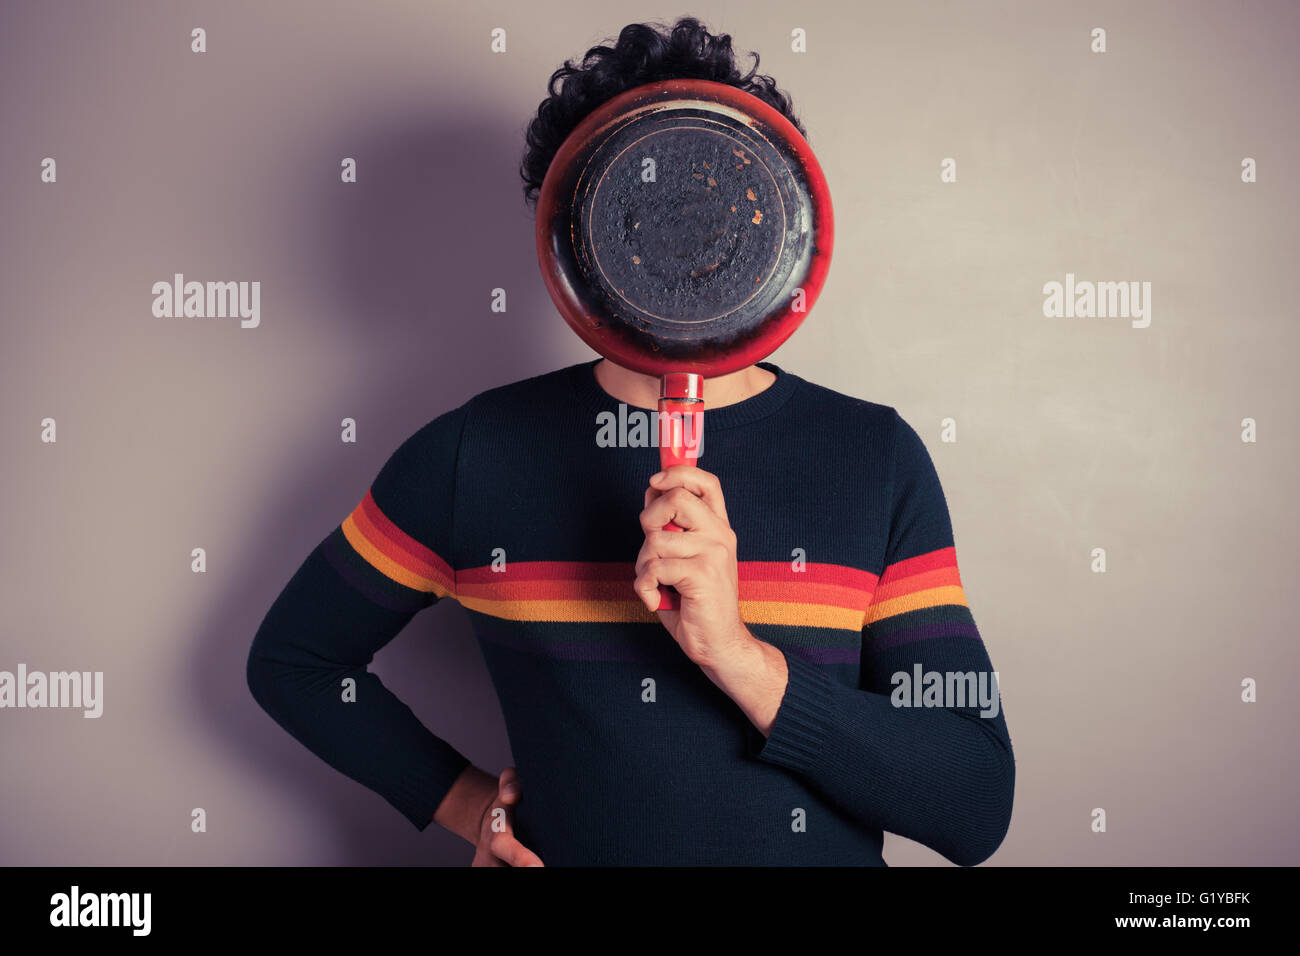 A young man is hiding his face behind a red frying pan Stock Photo